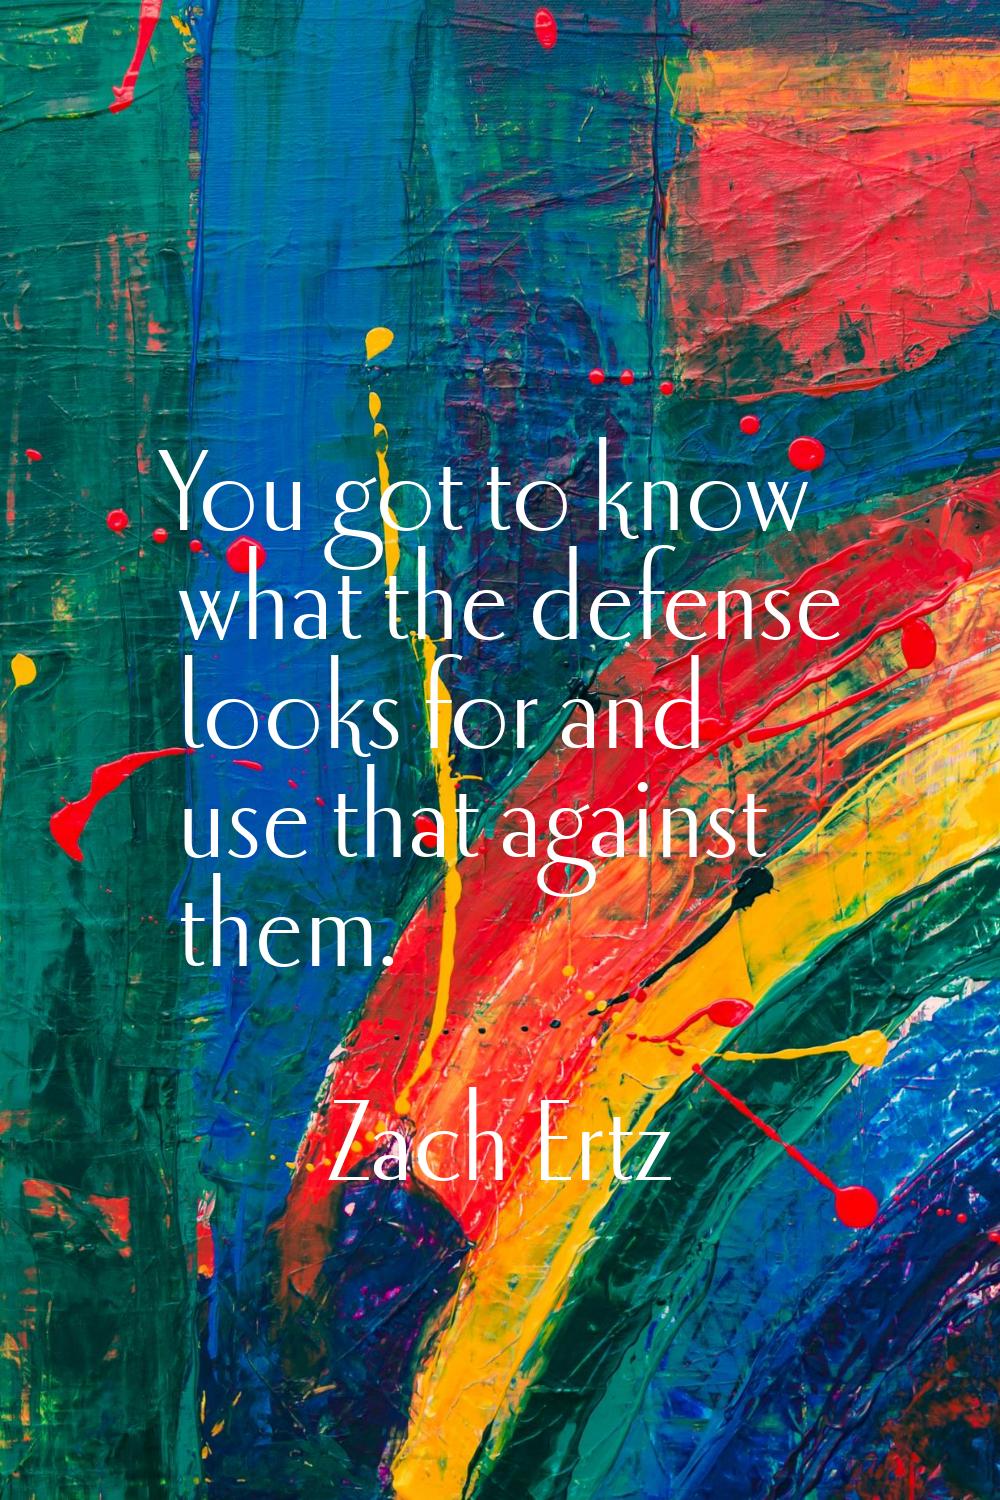 You got to know what the defense looks for and use that against them.